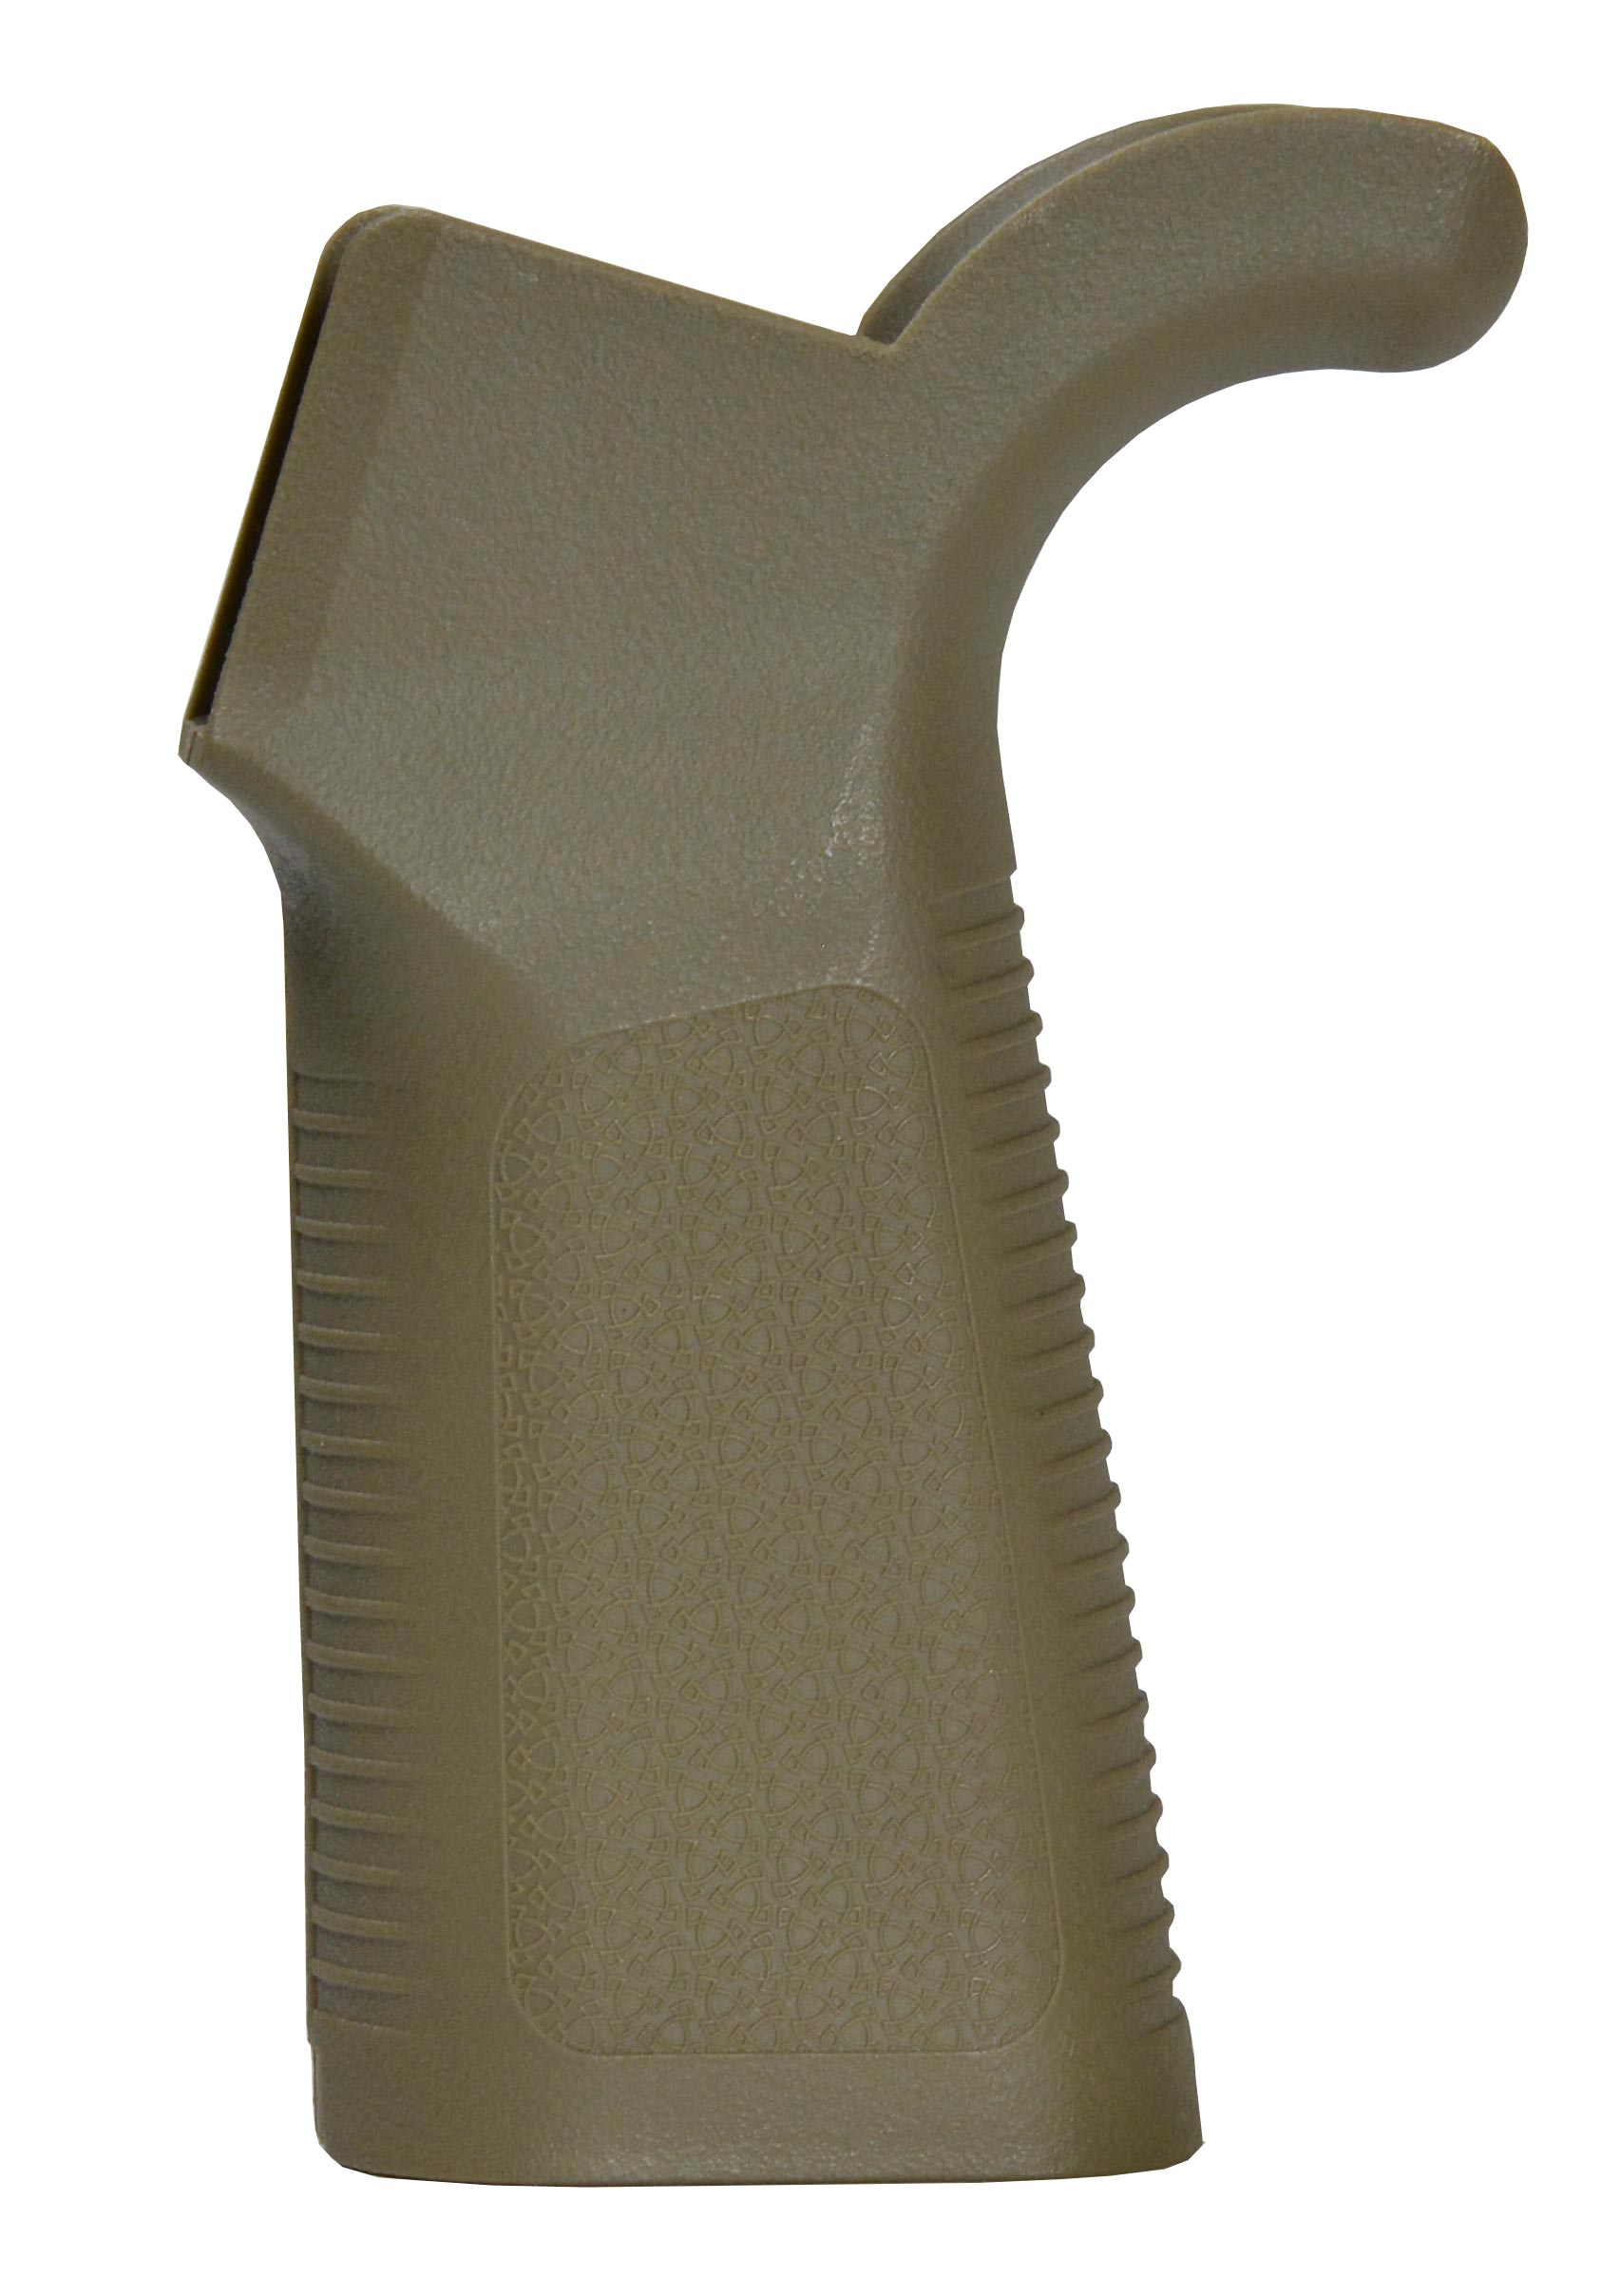 Loading Perfect Angle Grip for M4 / AR-15